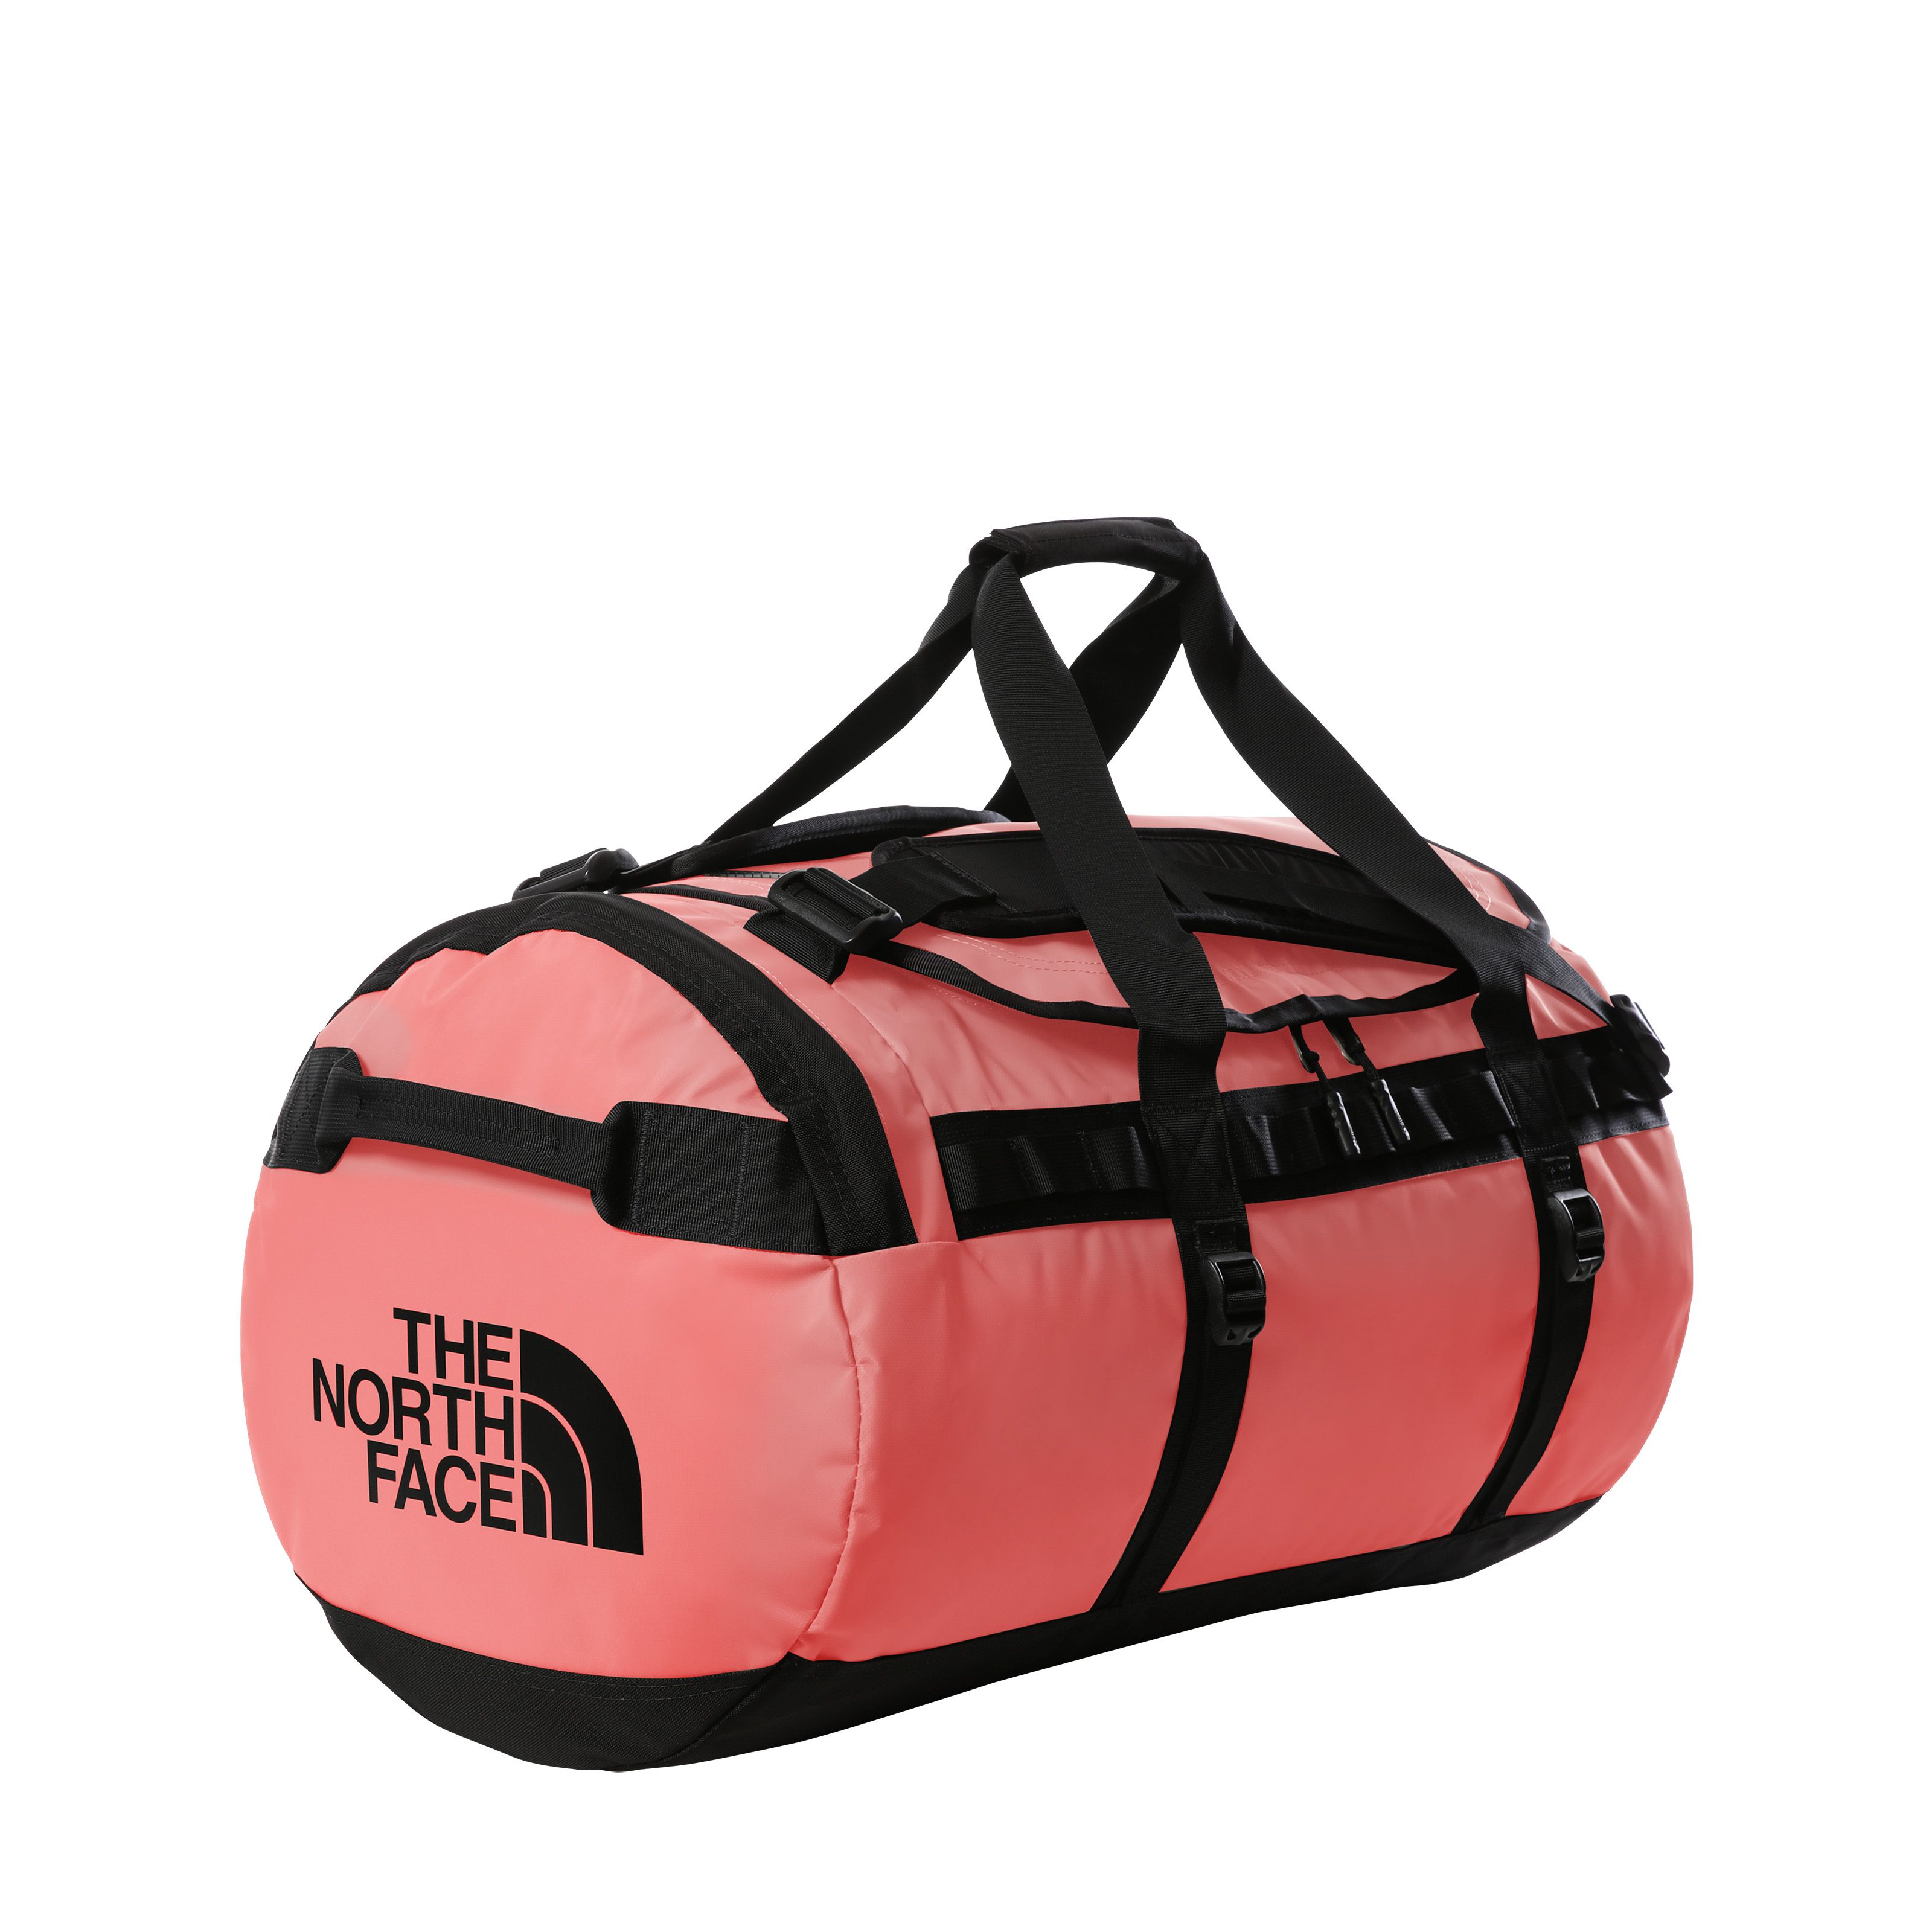 Sac de Voyage Base Camp Duffel M - Faded Rose / Tnf Black THE NORTH FACE -  Sports Aventure